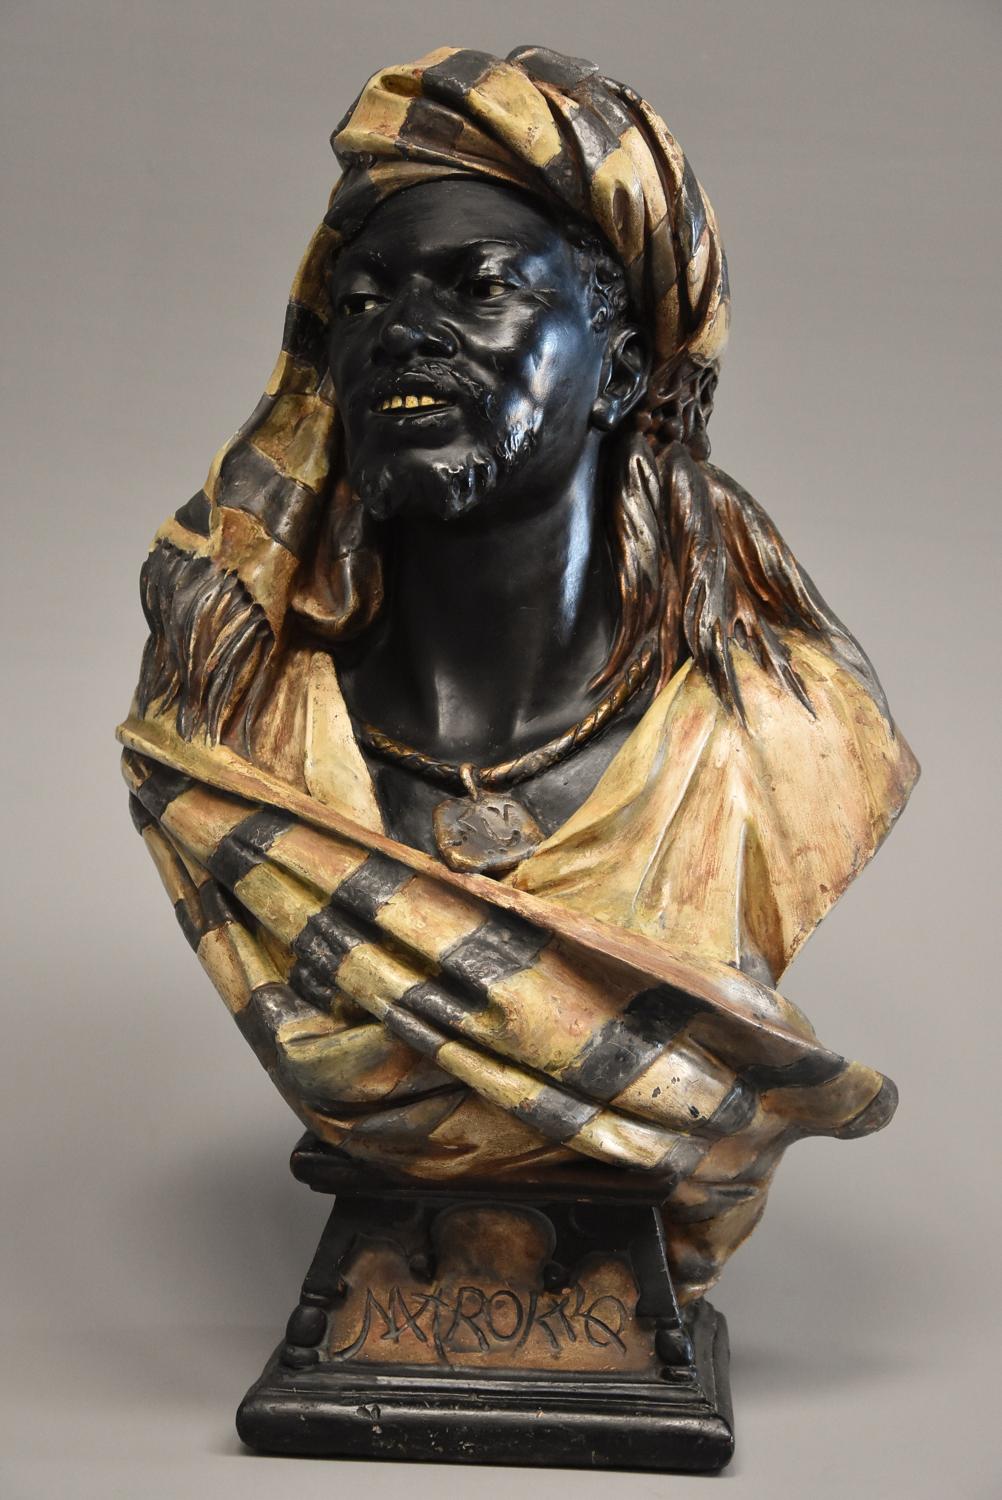 Highly decorative late 19thc life size Austrian bust of a Nubian man